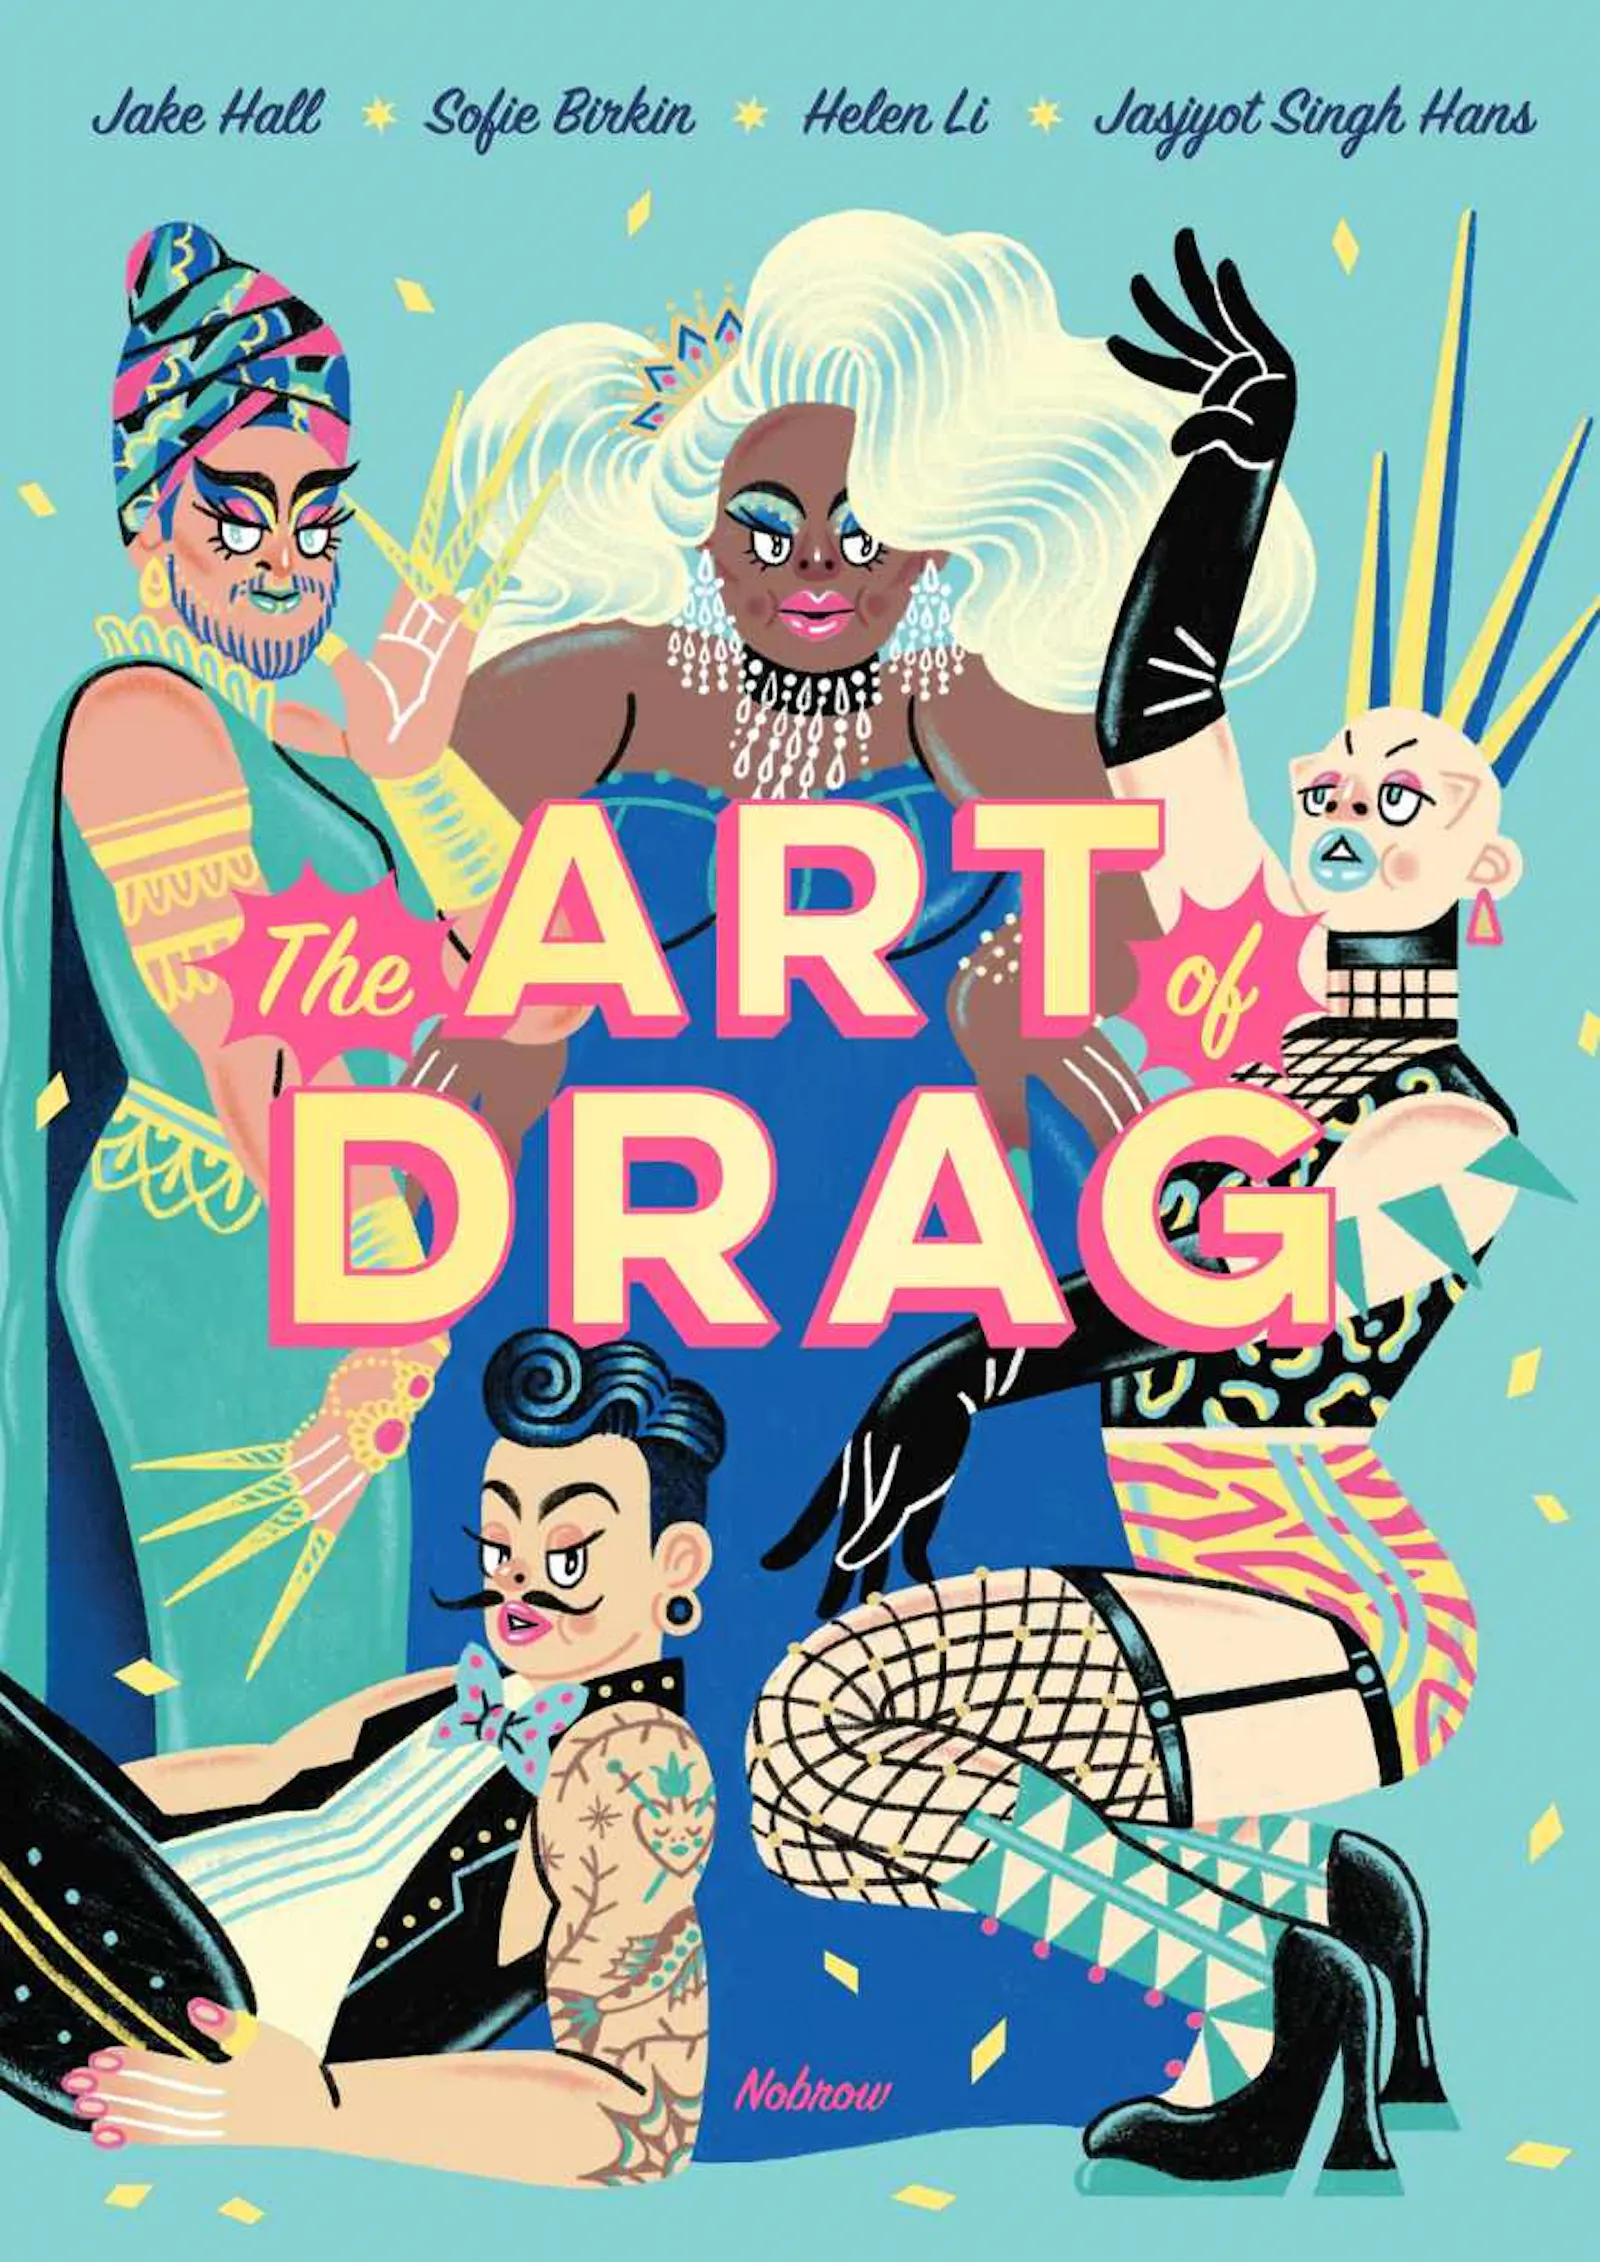 Cover des Buches "The Art of Drag"